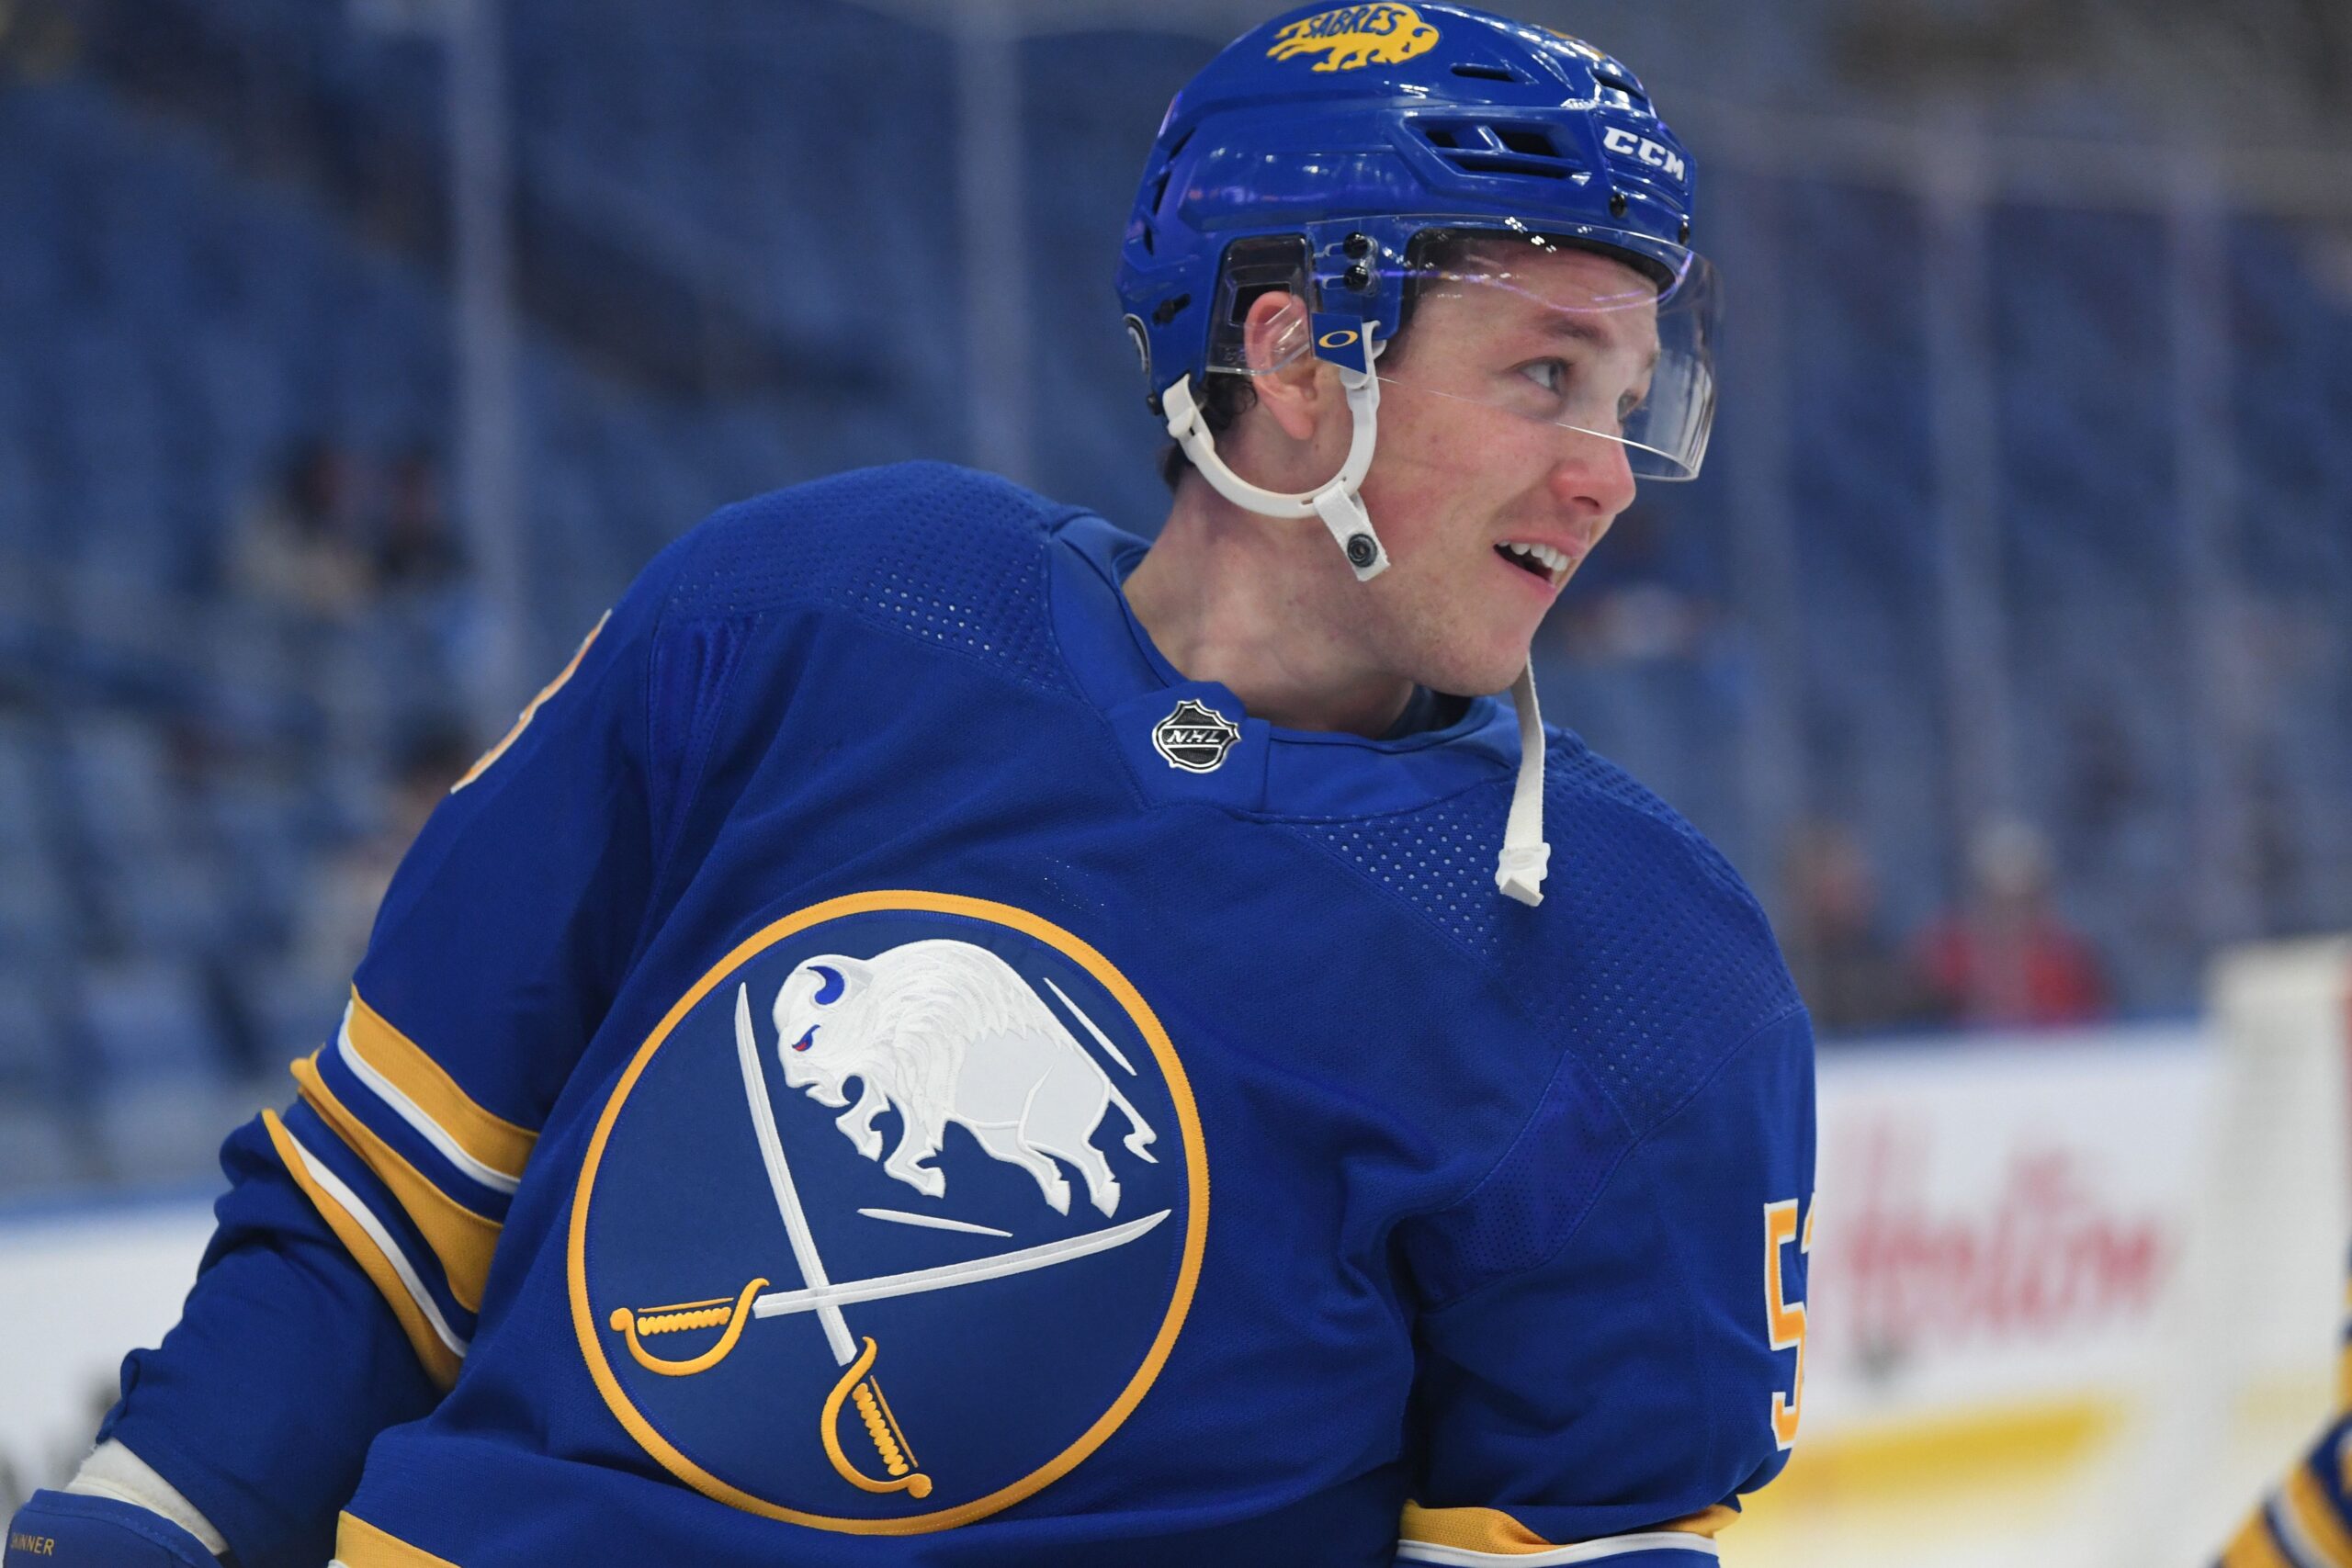 Jeff Skinner Overtime Goal, March 31, 2023, National Hockey League,  overtime, Jeff Skinner overtime winner ☑️ Devon Levi's first win in his  NHL debut ☑️ WHAT A NIGHT!, By Buffalo Sabres